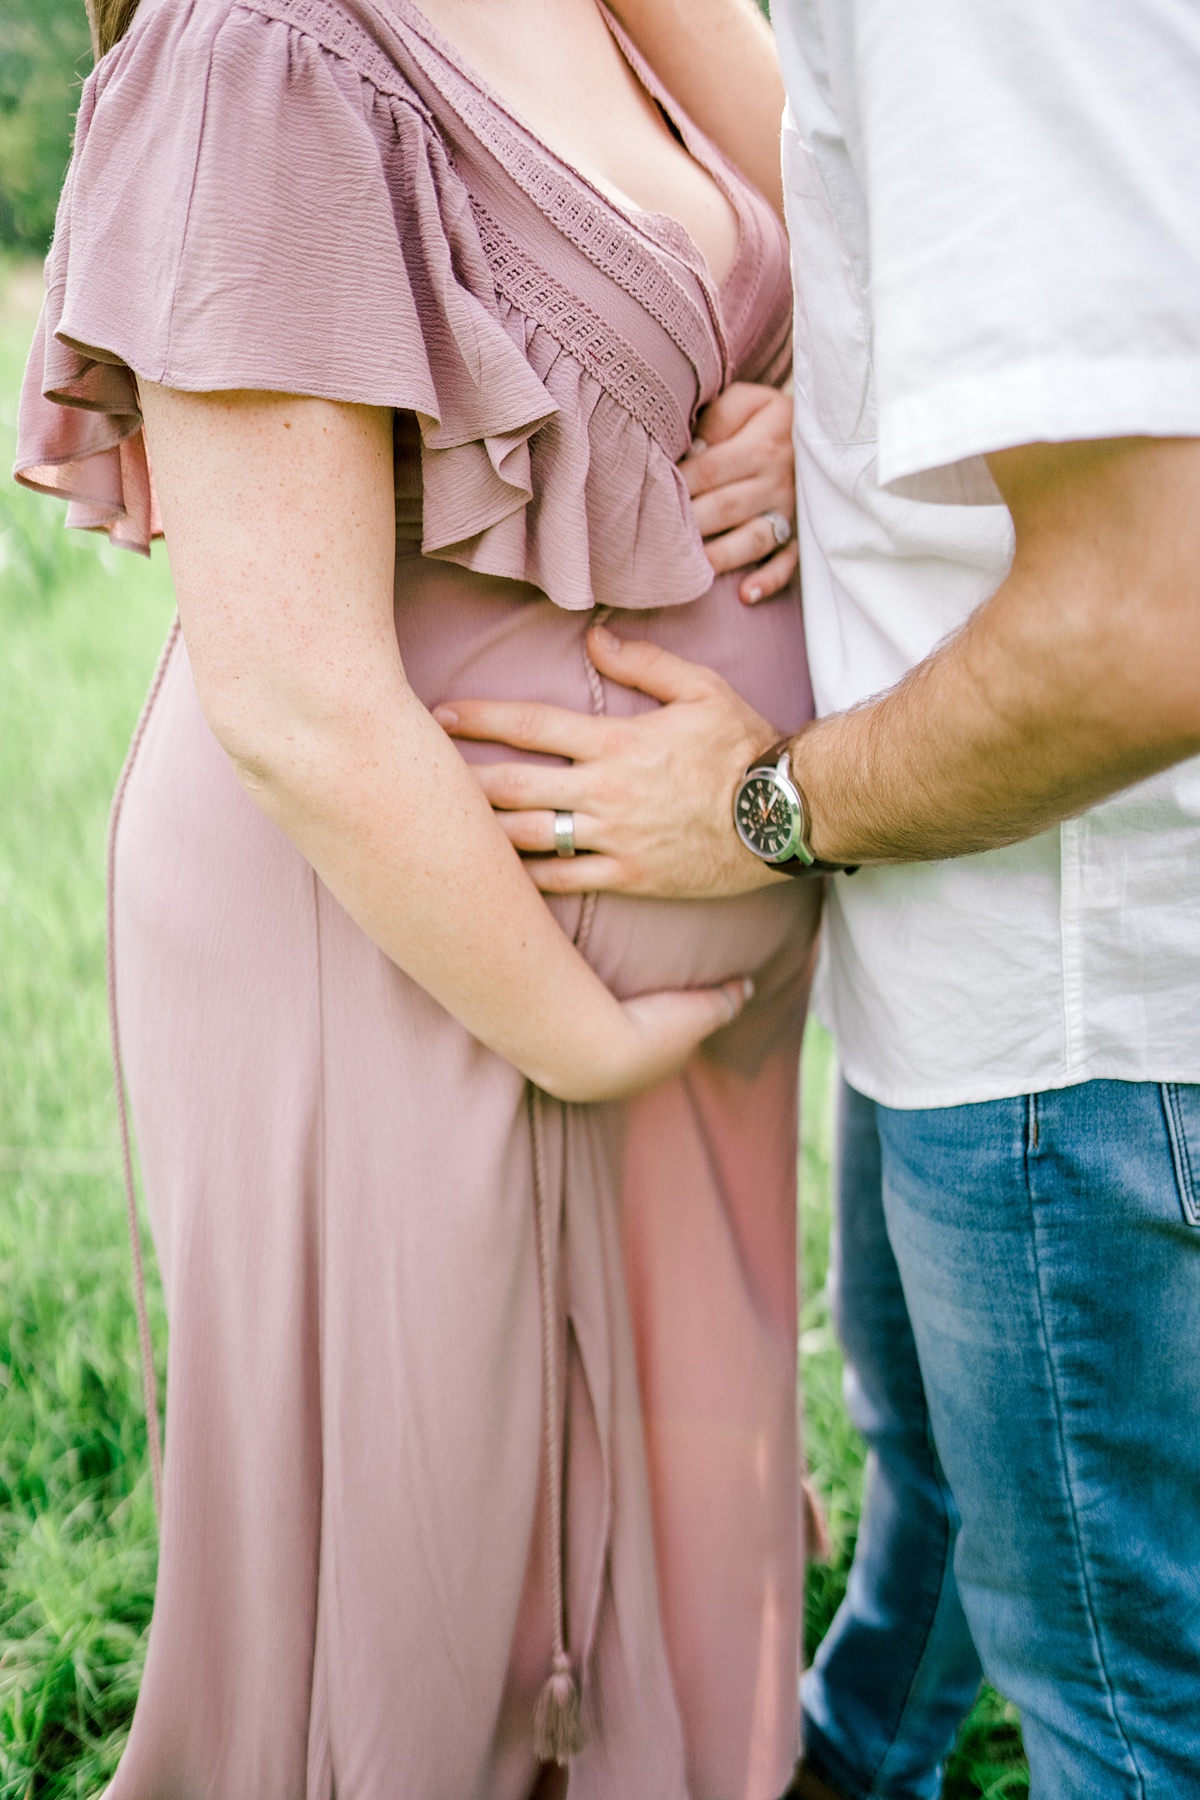 guy and girl holding her pregnant belly